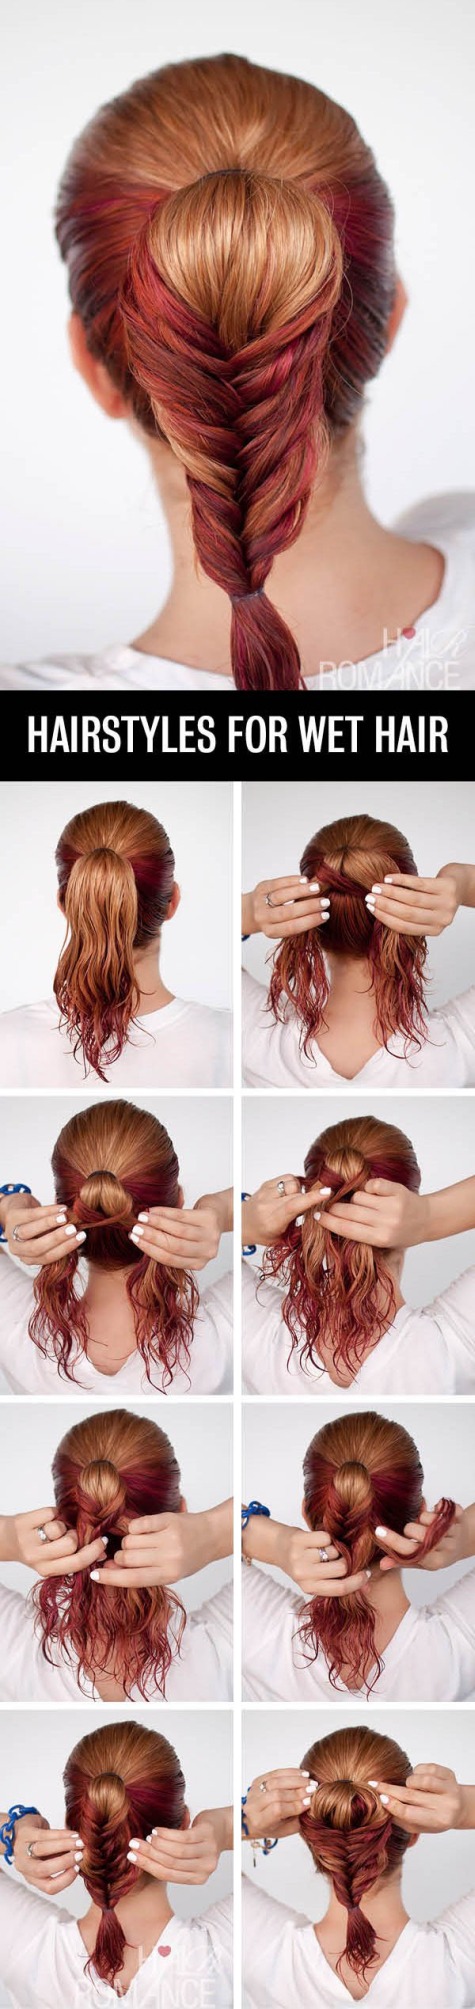 9 Easy Hairstyle Tutorials for Every Occasion | Hairstyles ...